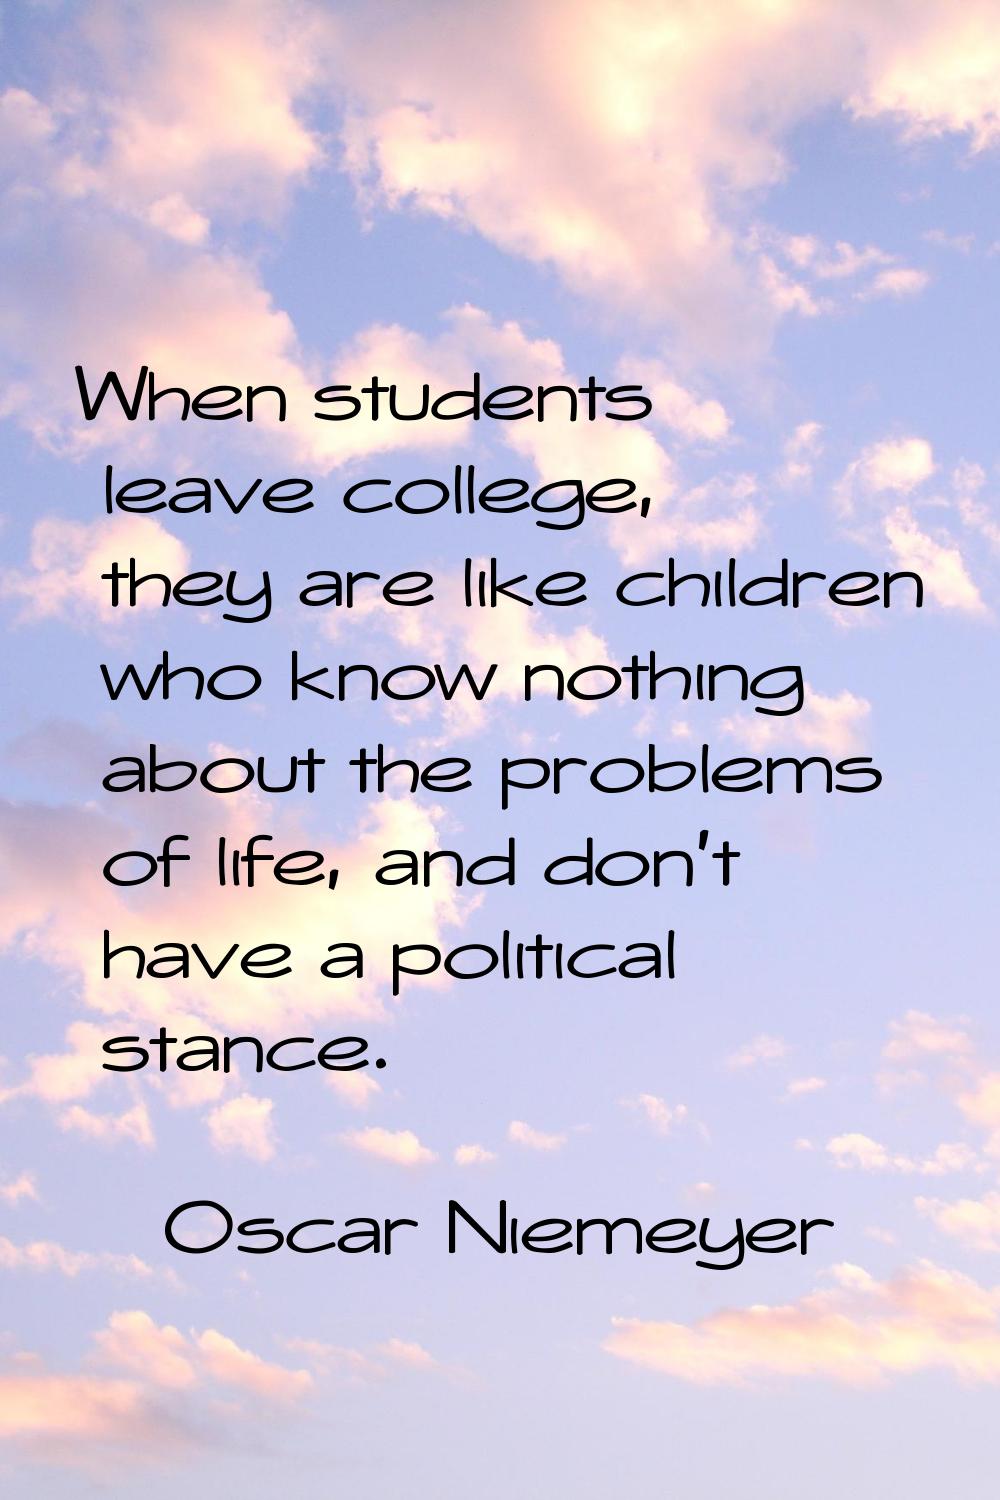 When students leave college, they are like children who know nothing about the problems of life, an